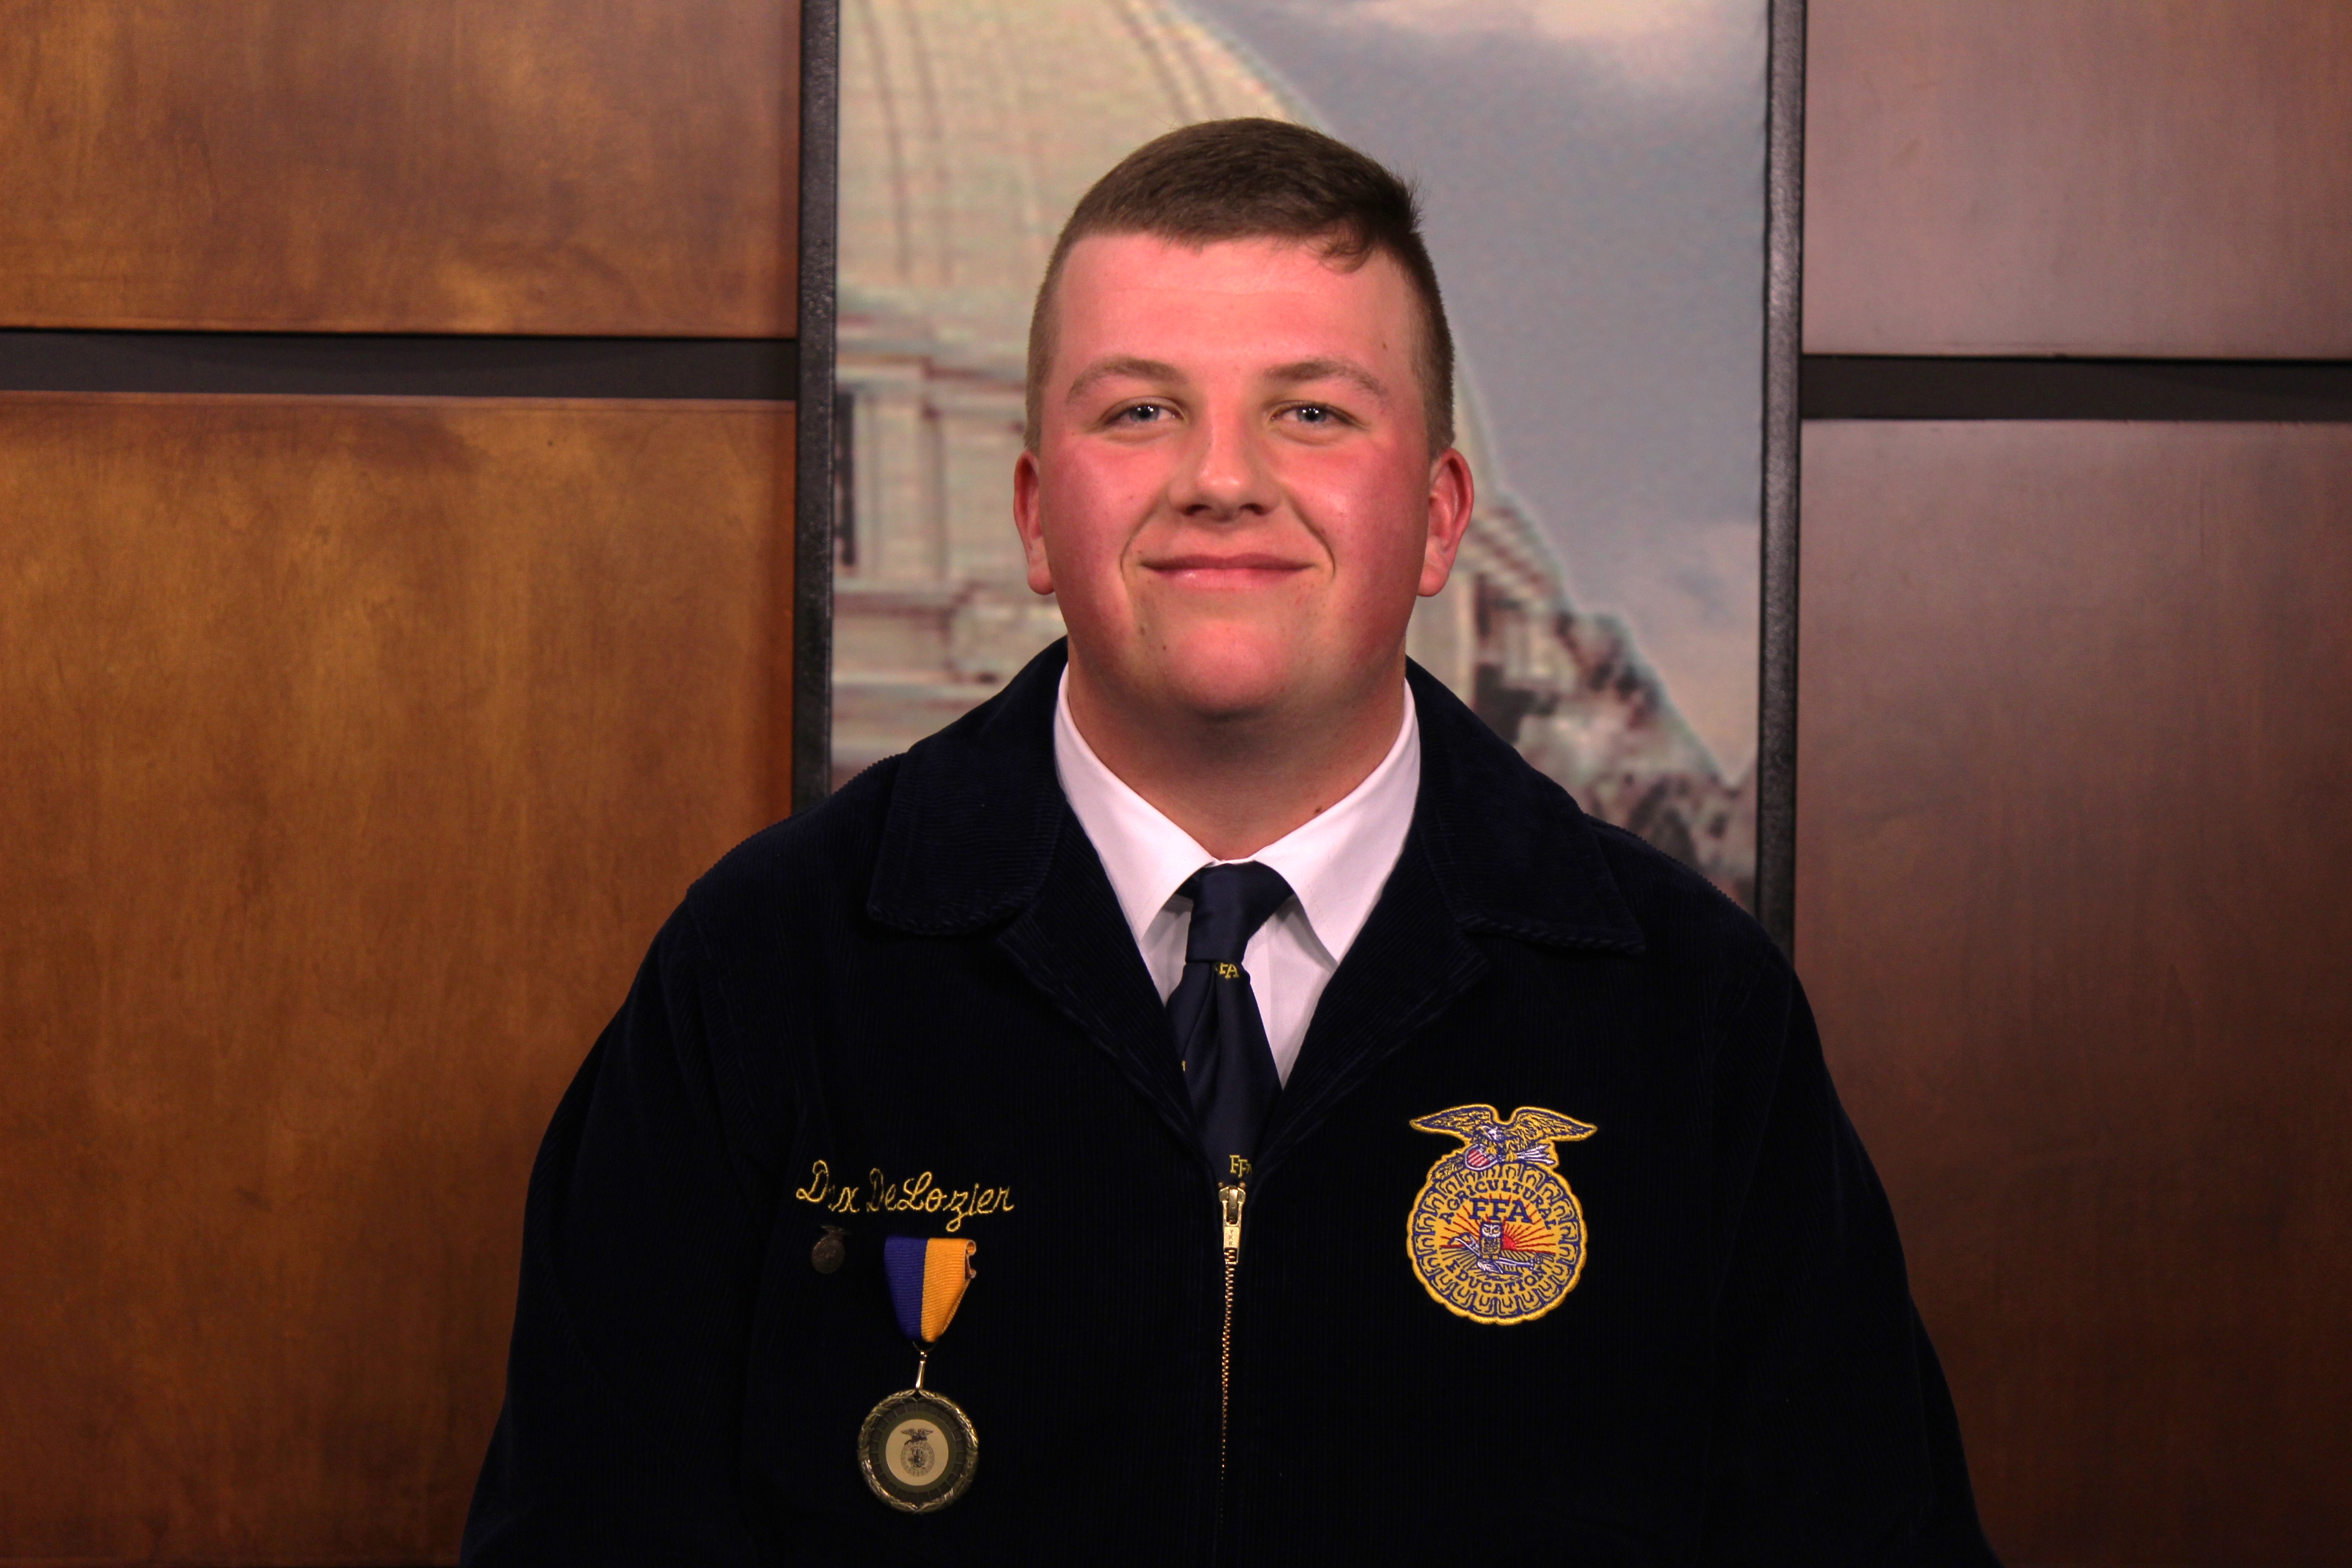 Introducing Dax DeLozier of the Adair FFA Chapter, Your 2022 Northwest Area Star in Agricultural Placement